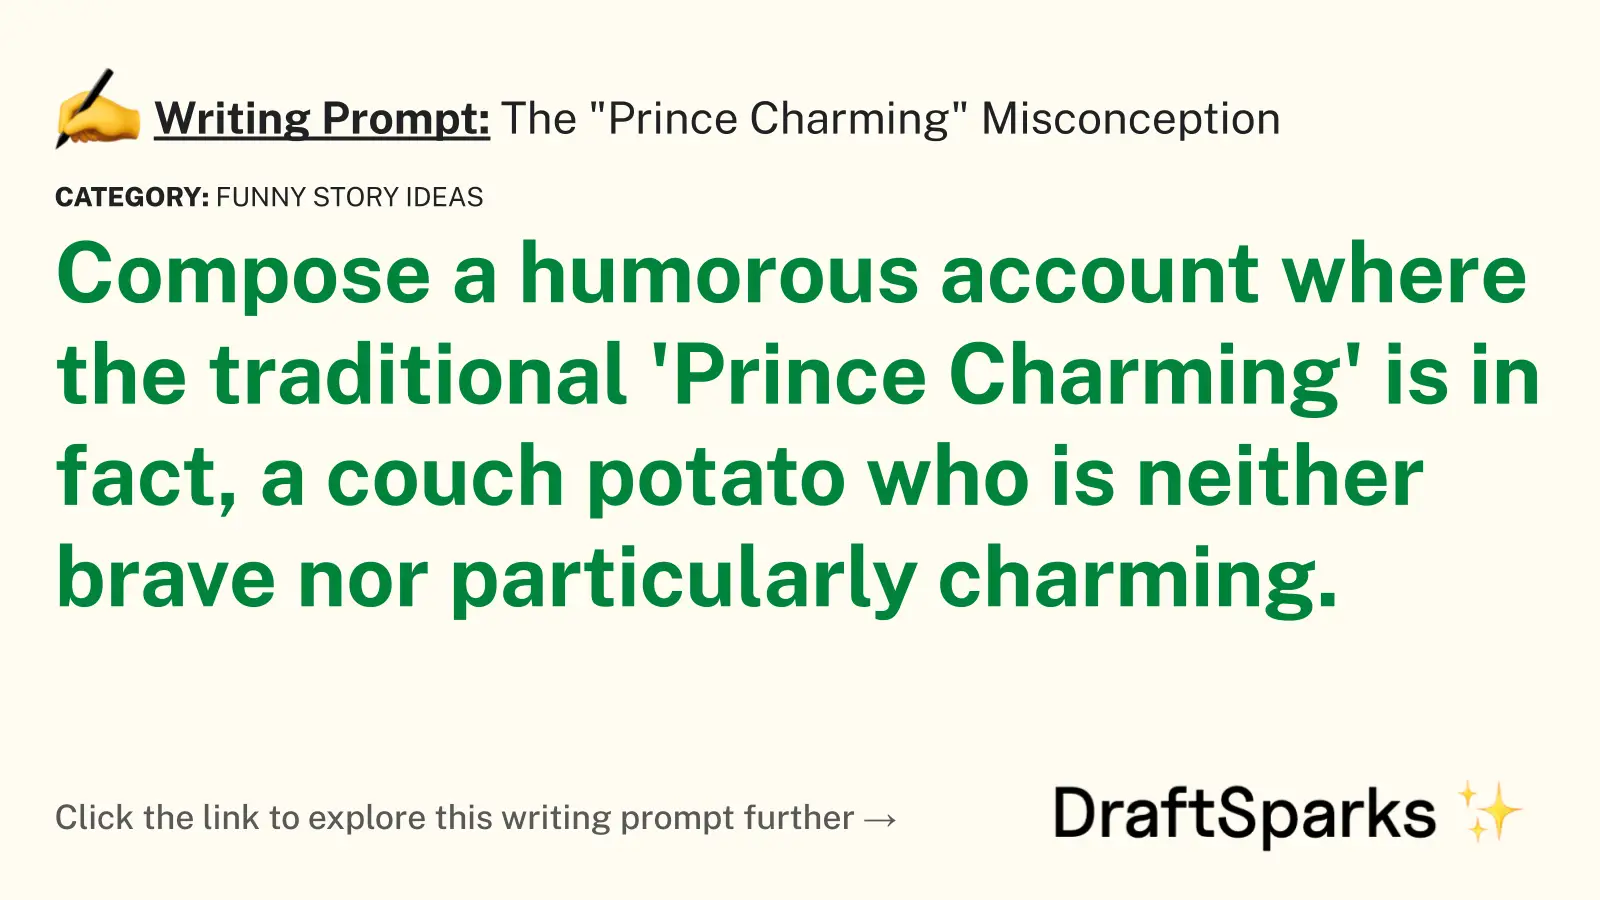 The “Prince Charming” Misconception